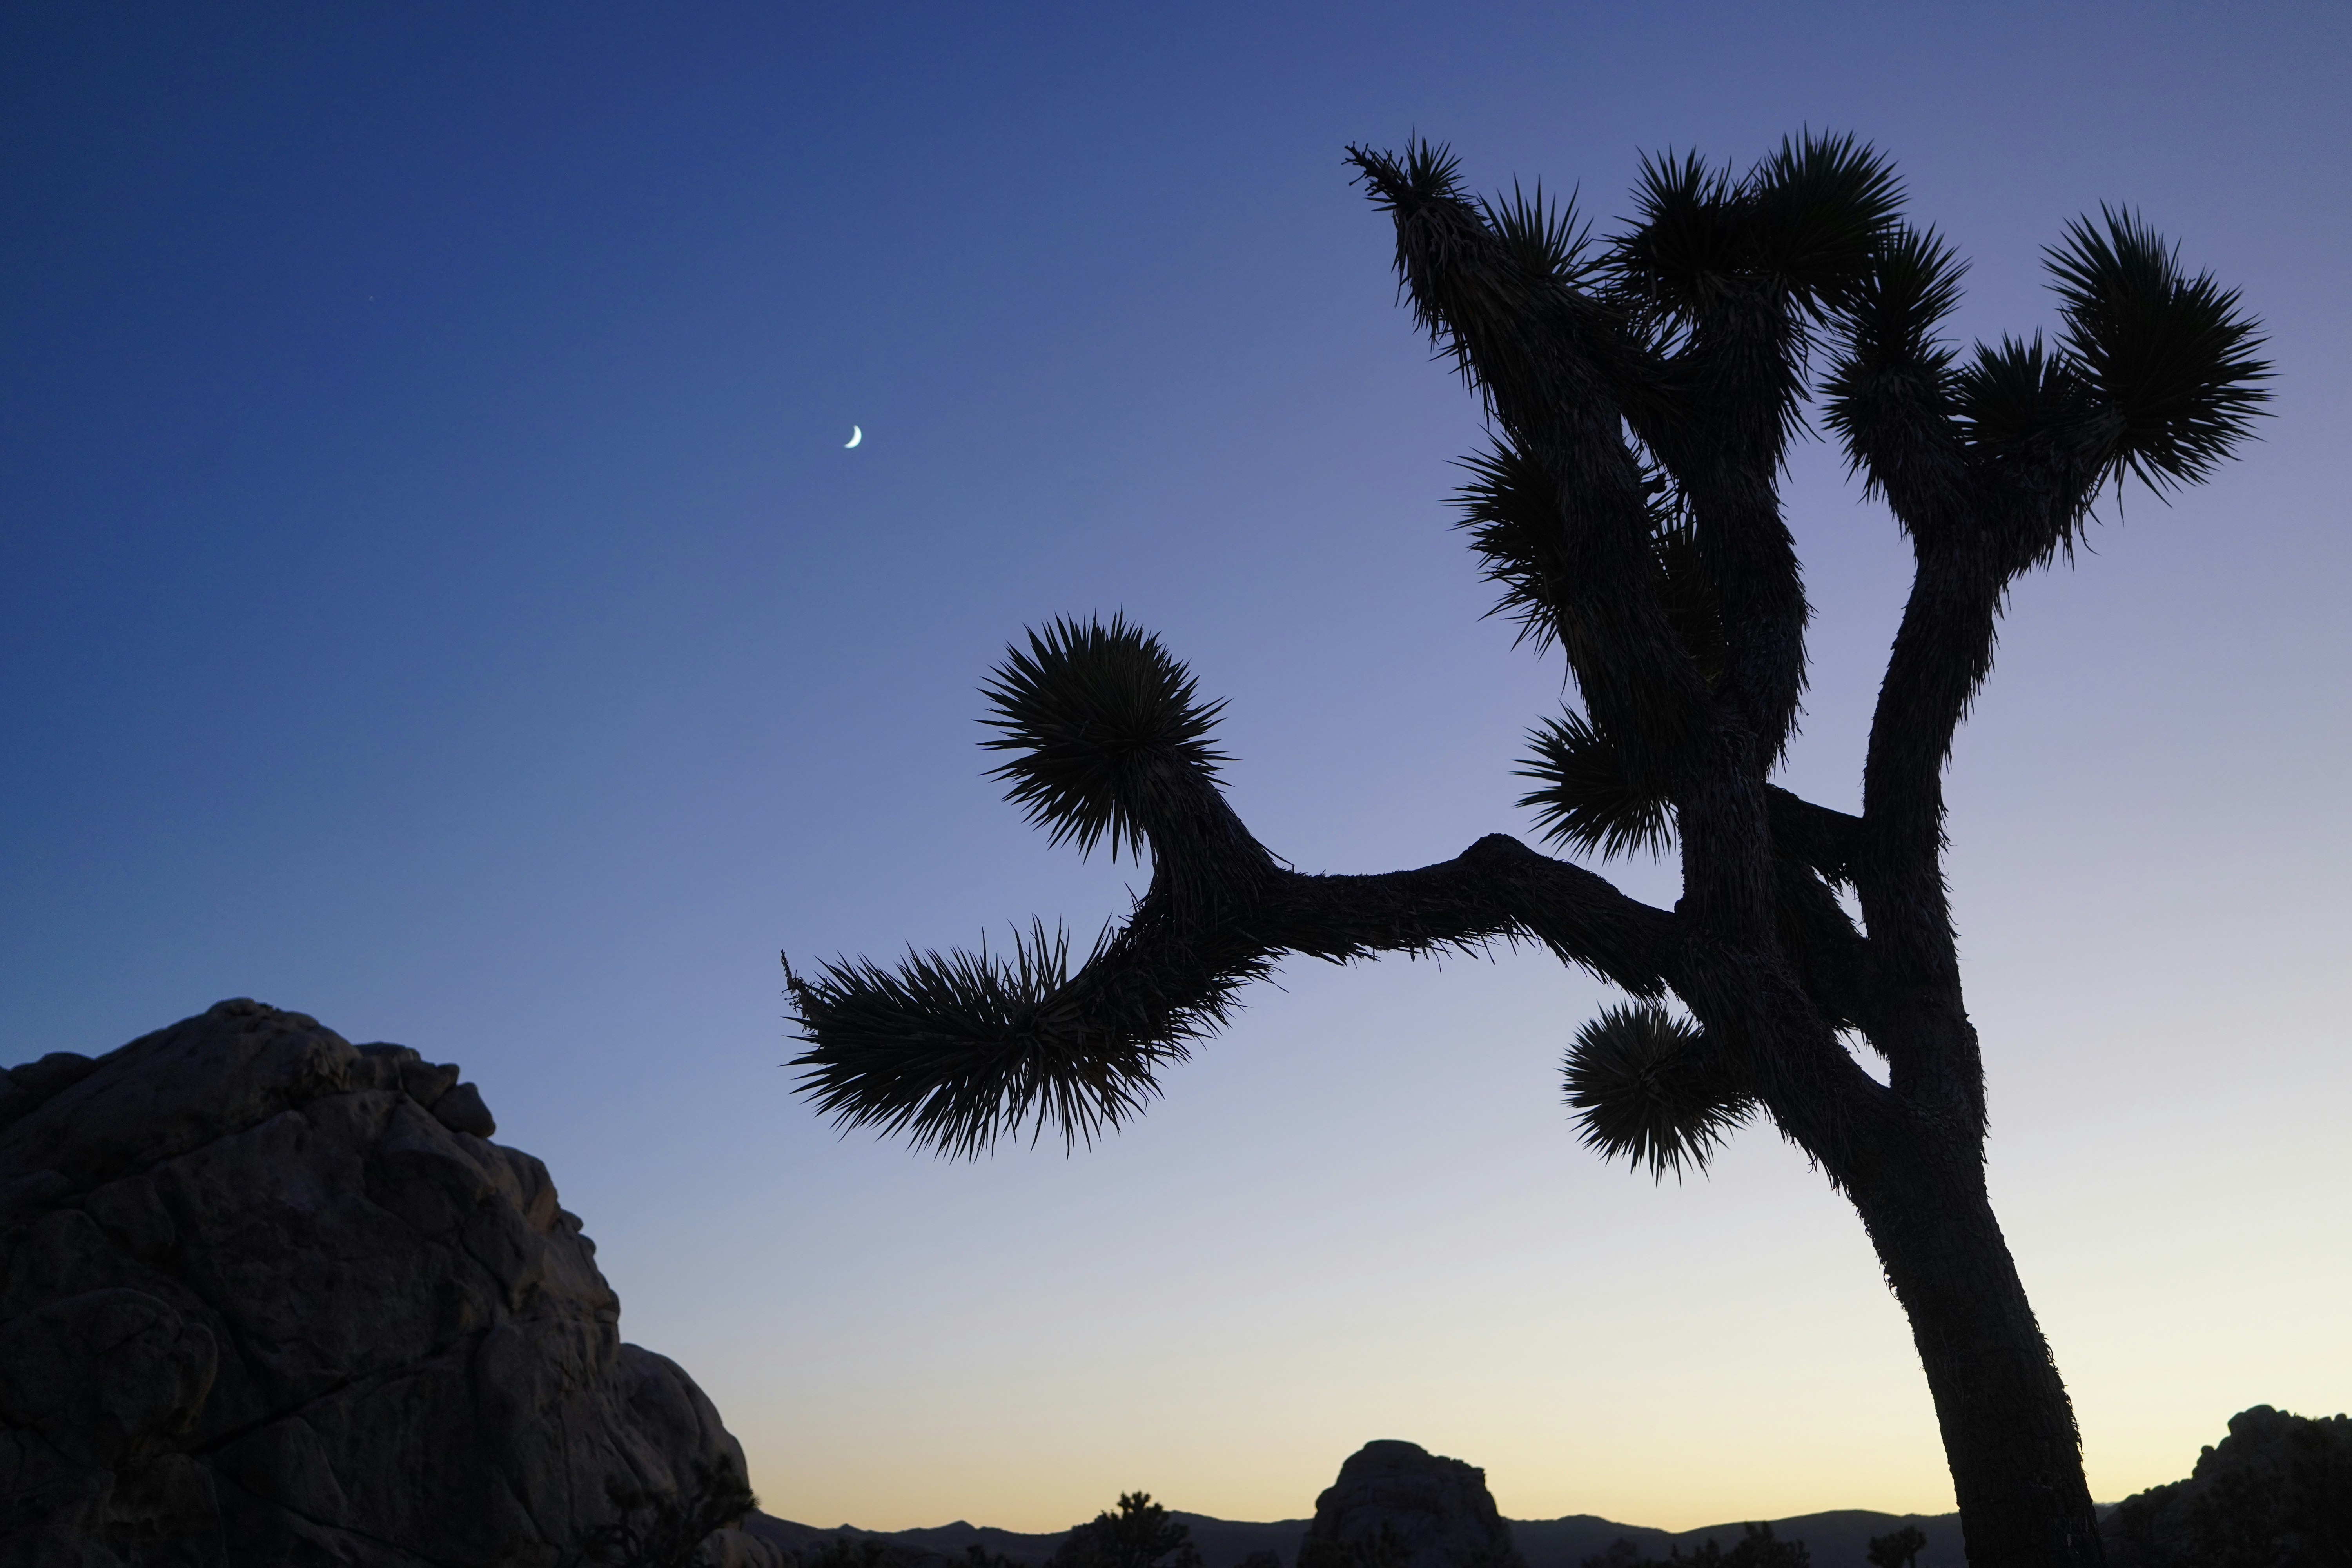 Silouette of a Joshua tree with a crescent moon at dusk